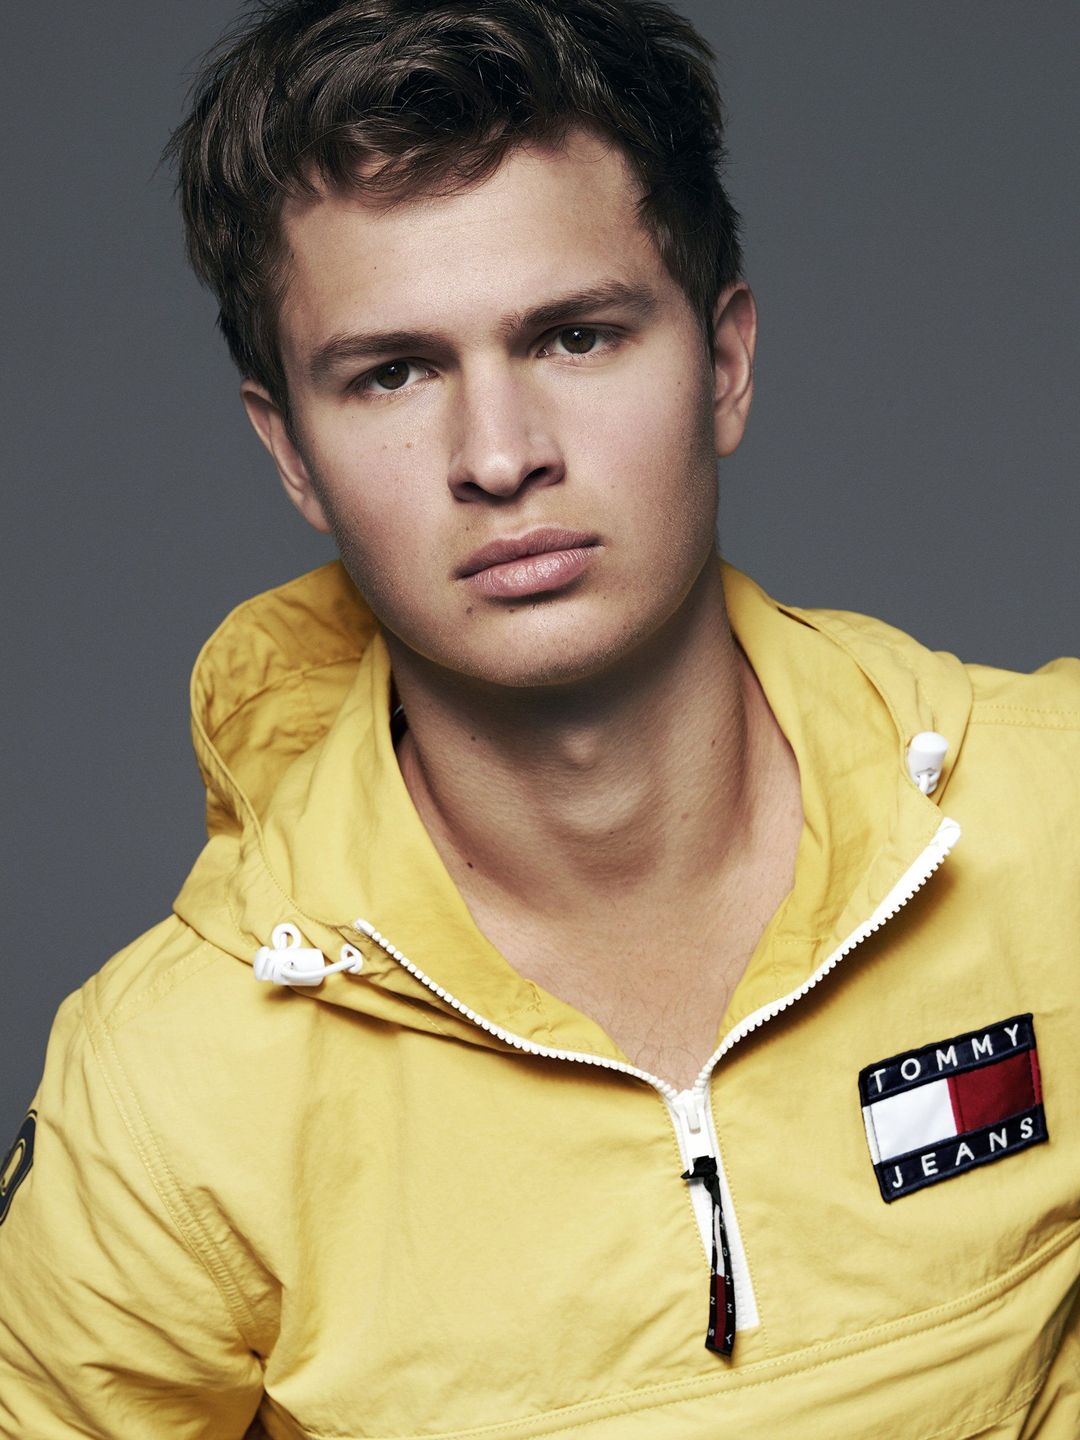 Ansel Elgort how did he became famous